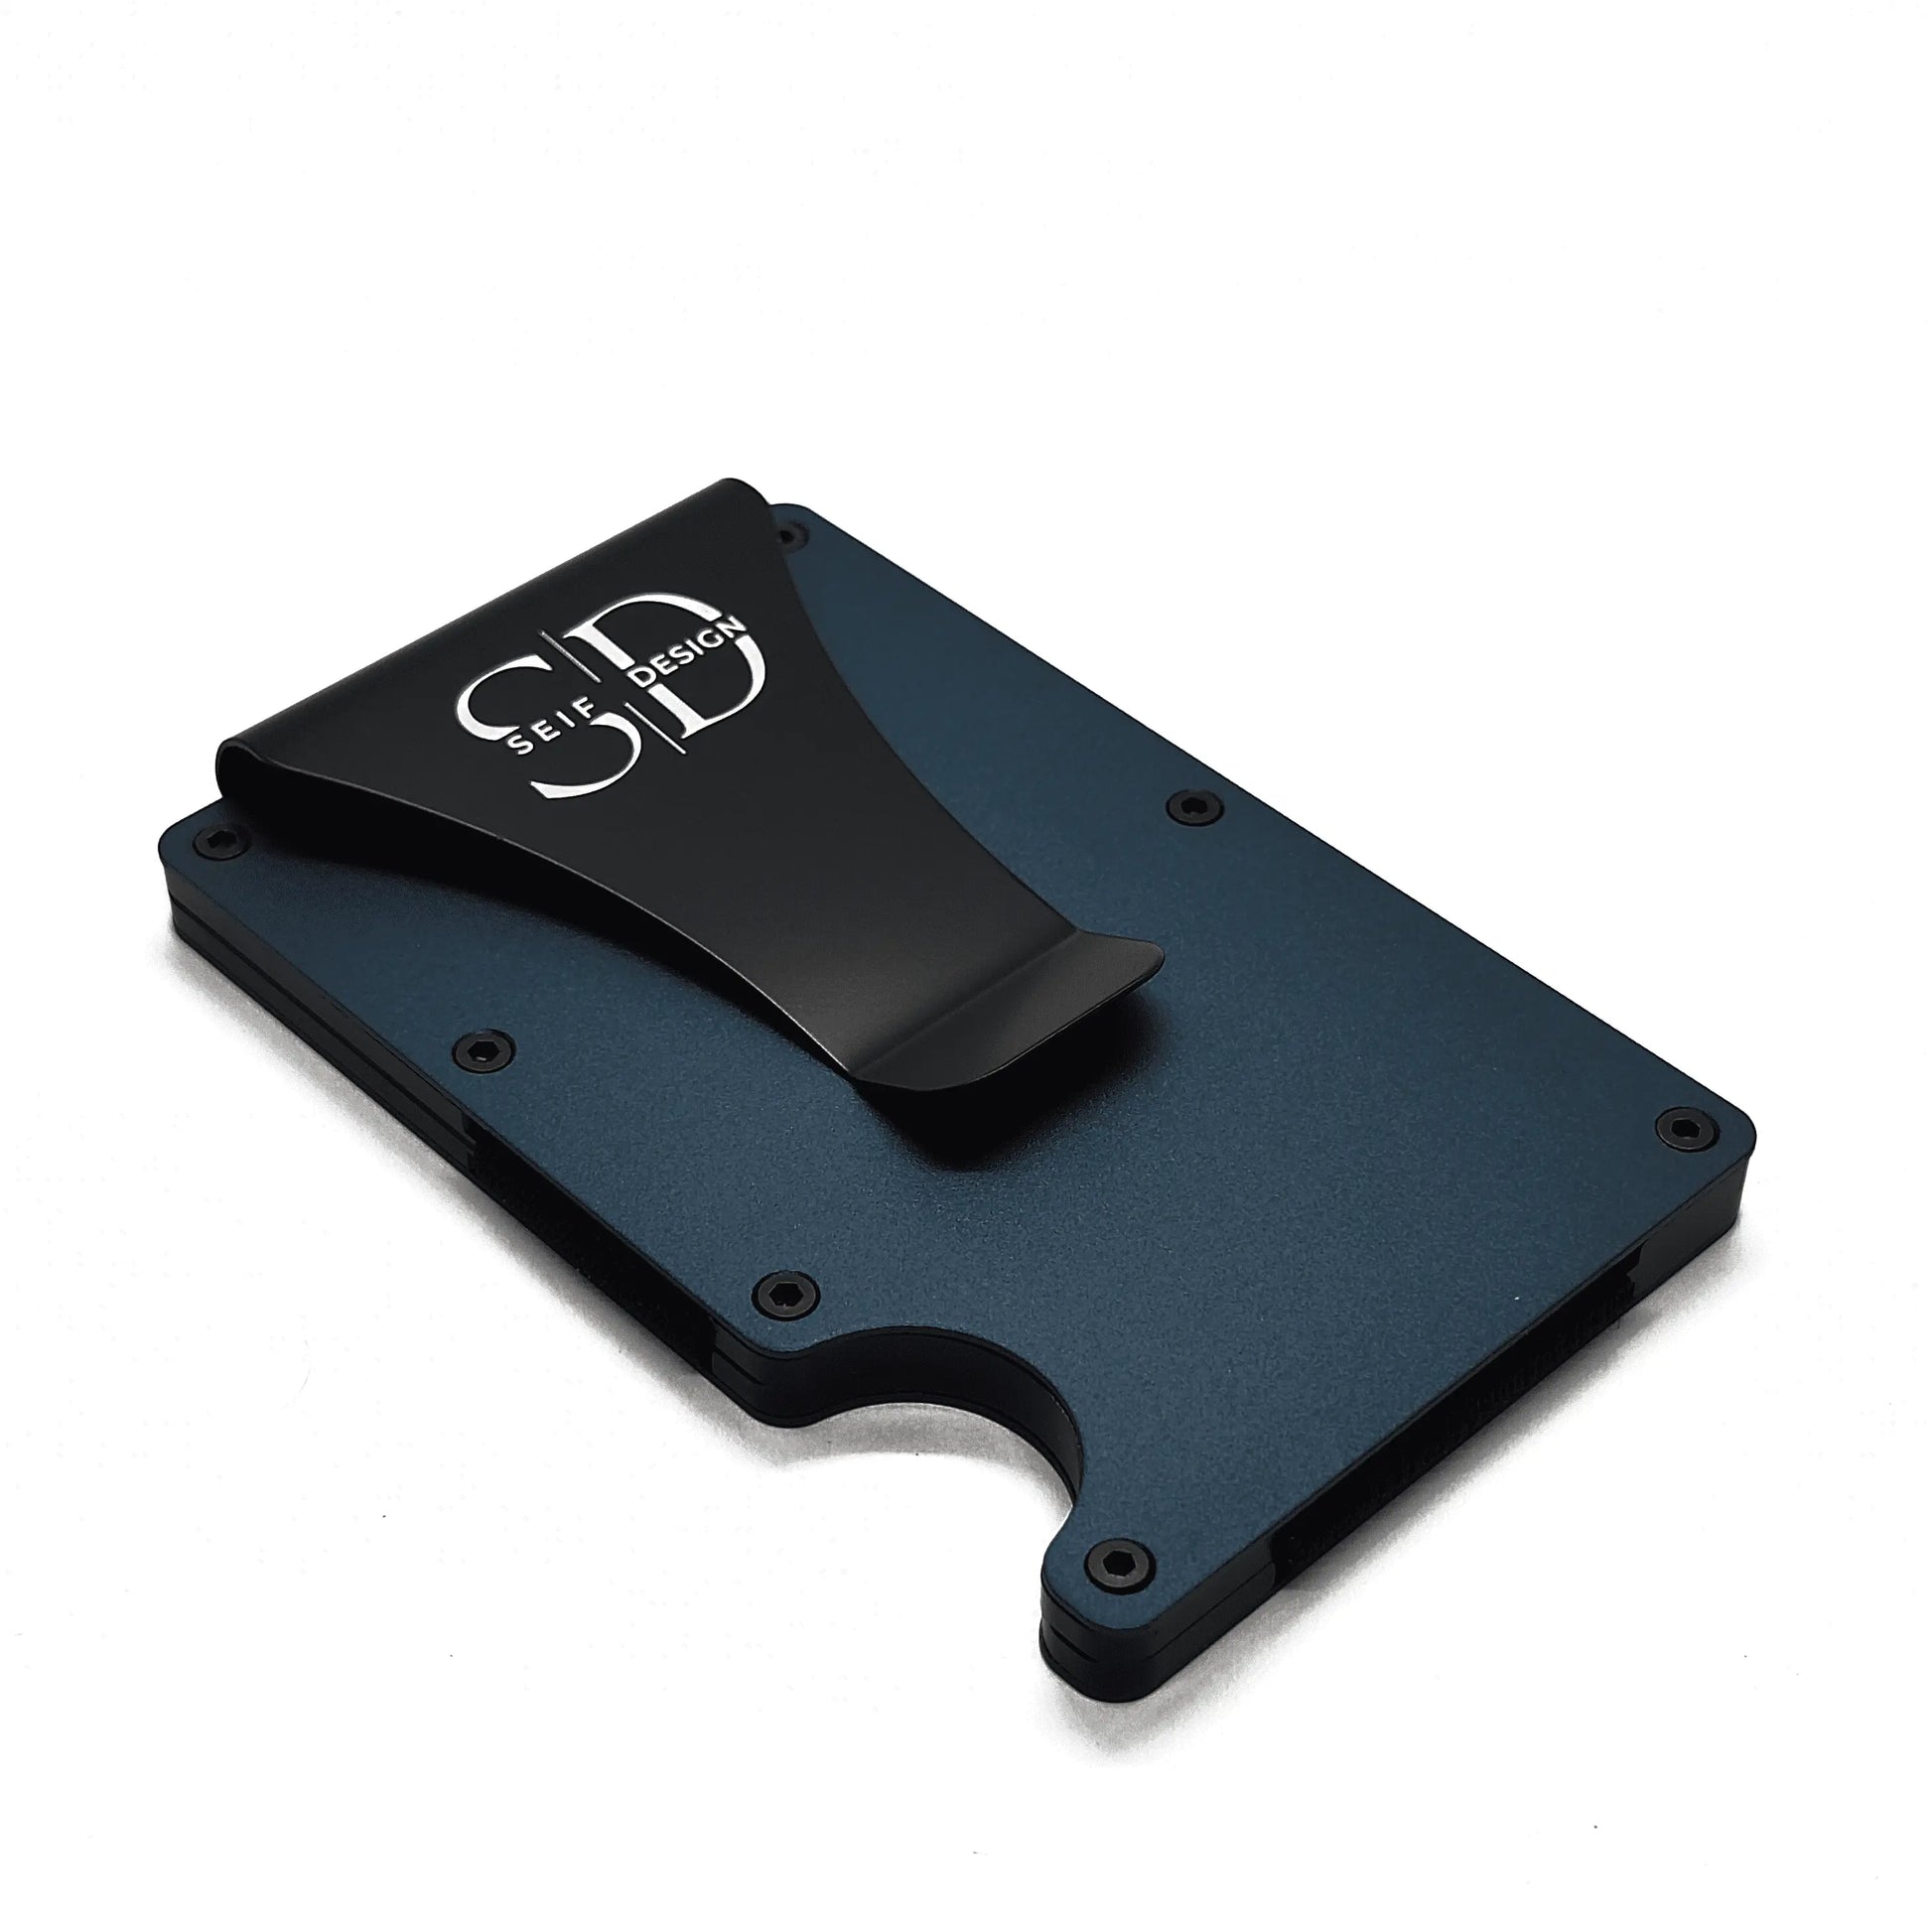 Sleek aluminum cardholder with RFID blocking, holding up to 12 cards. Eco-friendly packaging. Seif Design's Lite Blue cardholder embodies style and security.